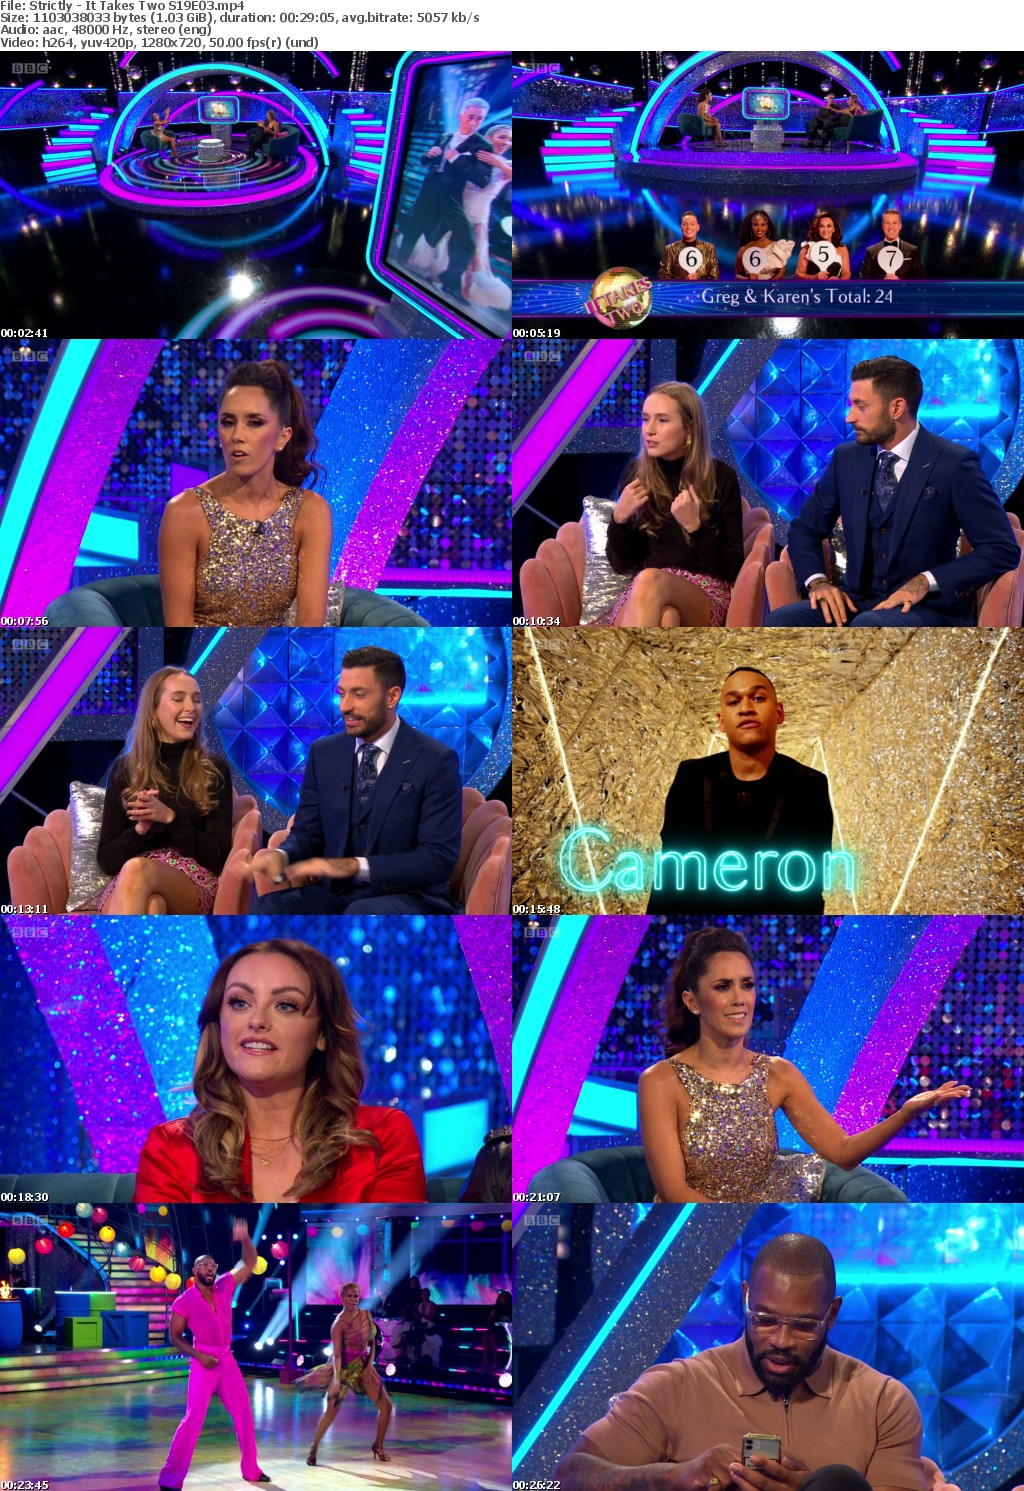 Strictly - It Takes Two S19E03 (1280x720p HD, 50fps, soft Eng subs)